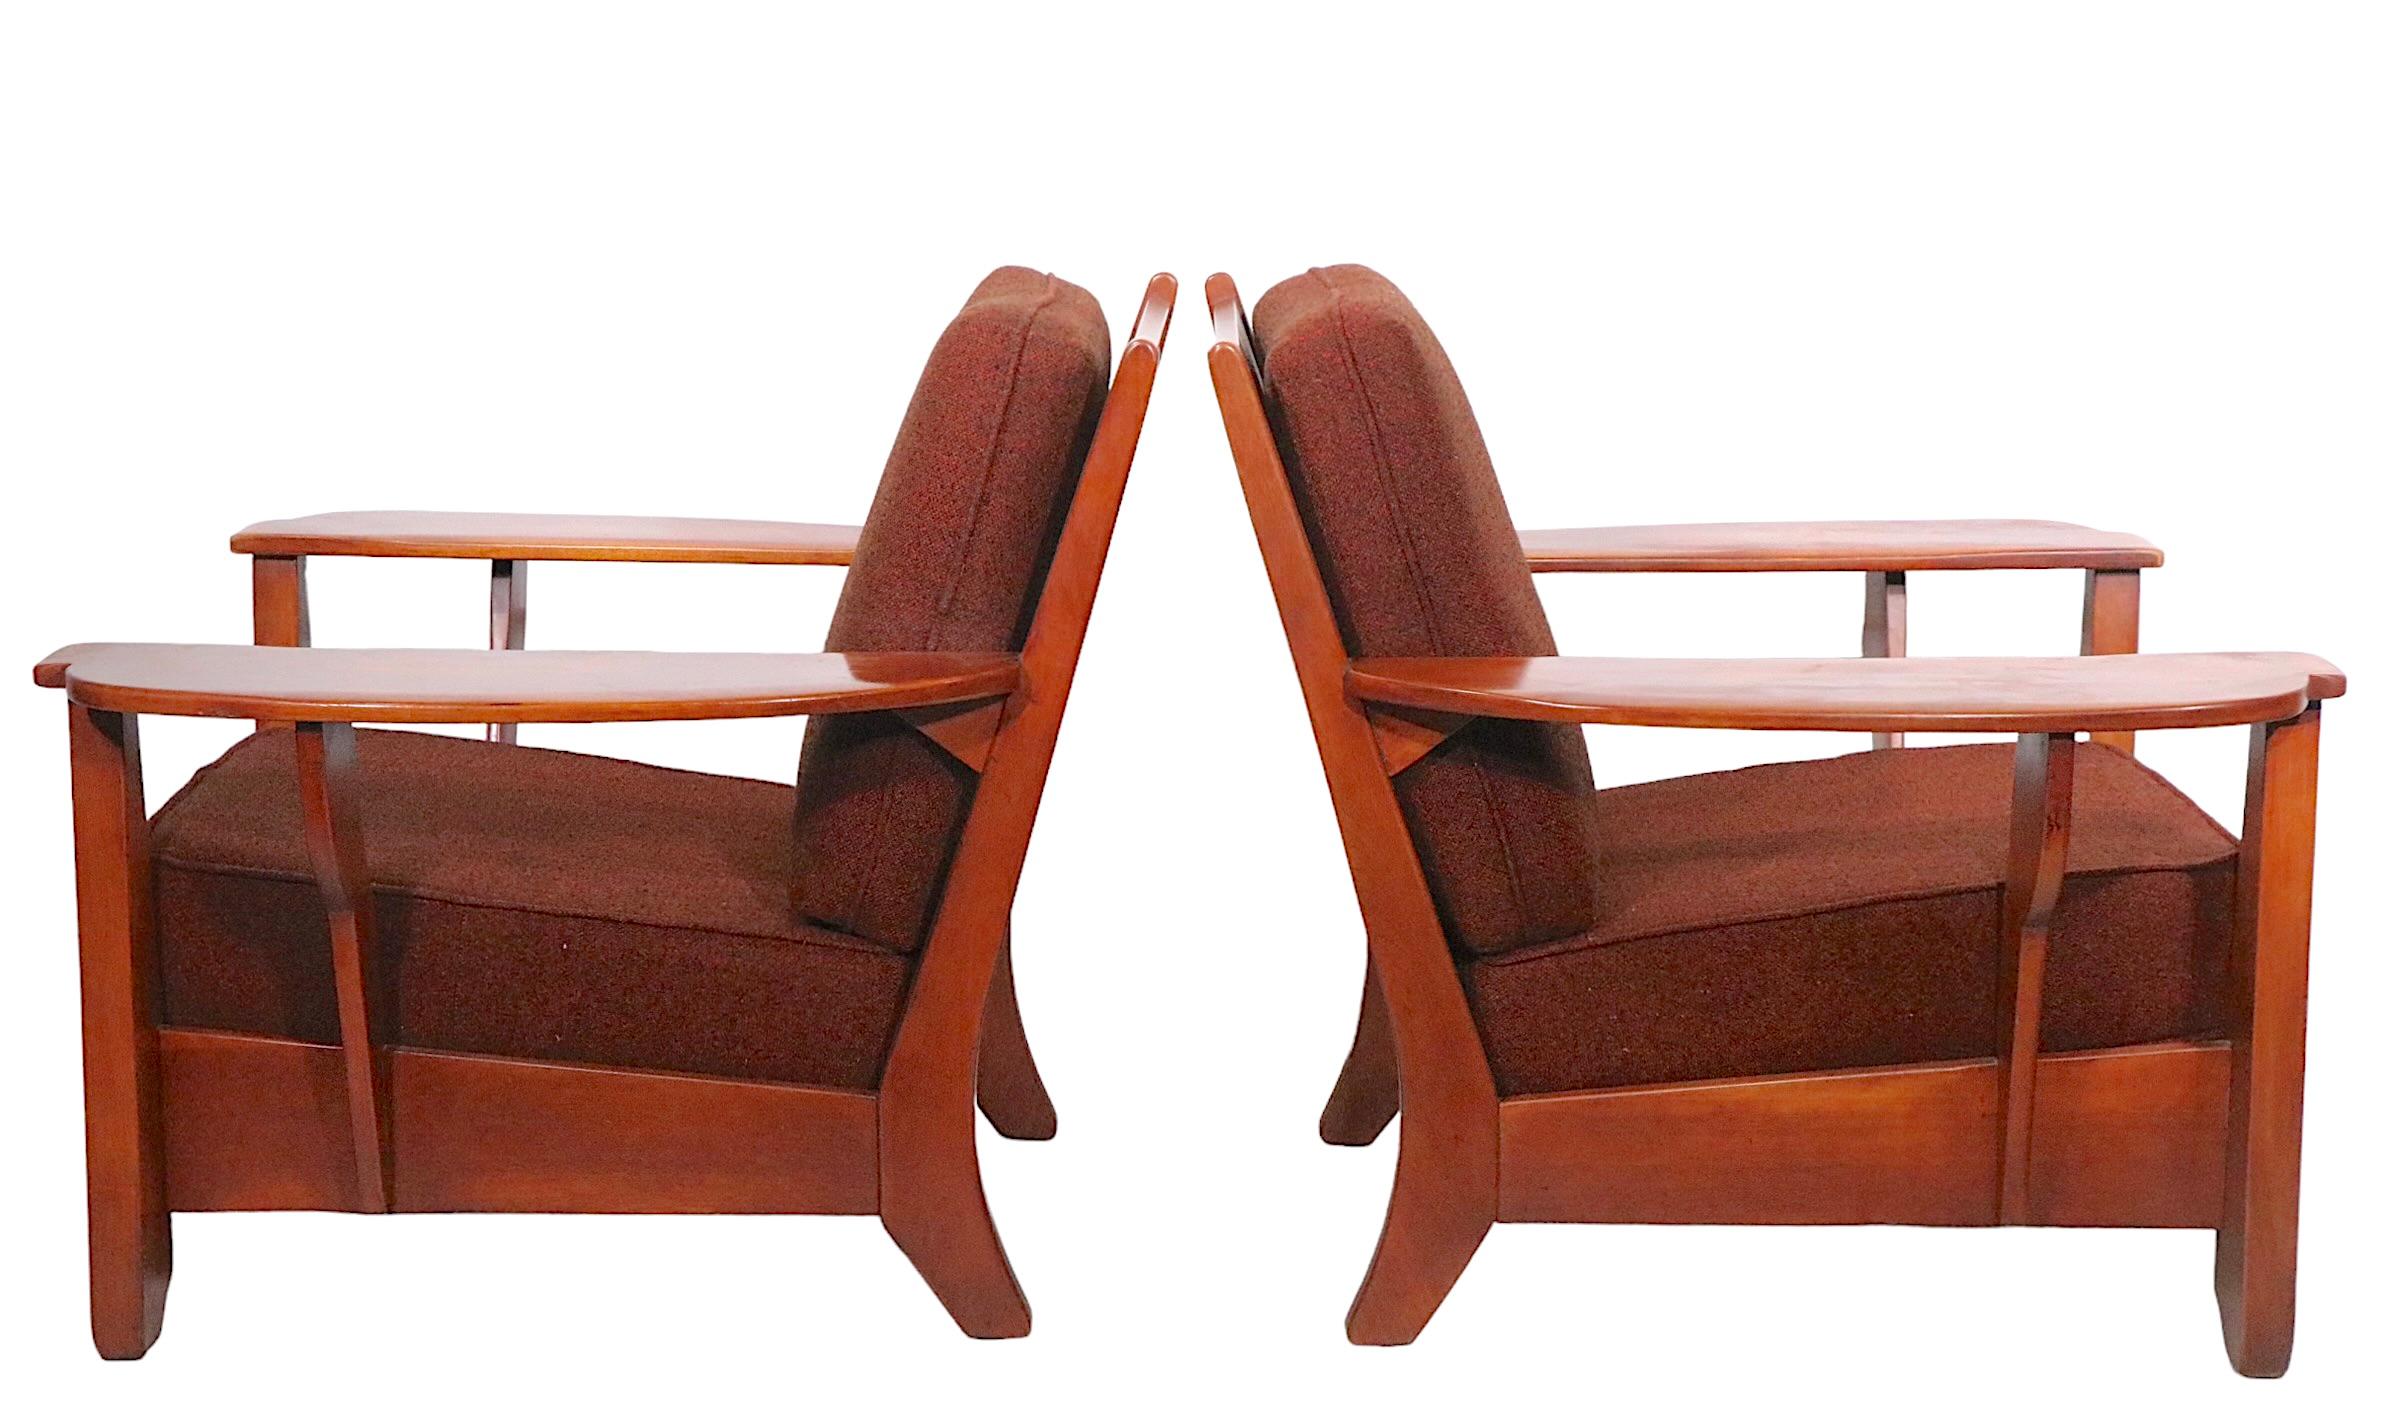 Art Deco Pr. Paddle Arm Lounge Chairs by Herman de Vries for Cushman Colonial, c 1940-50s